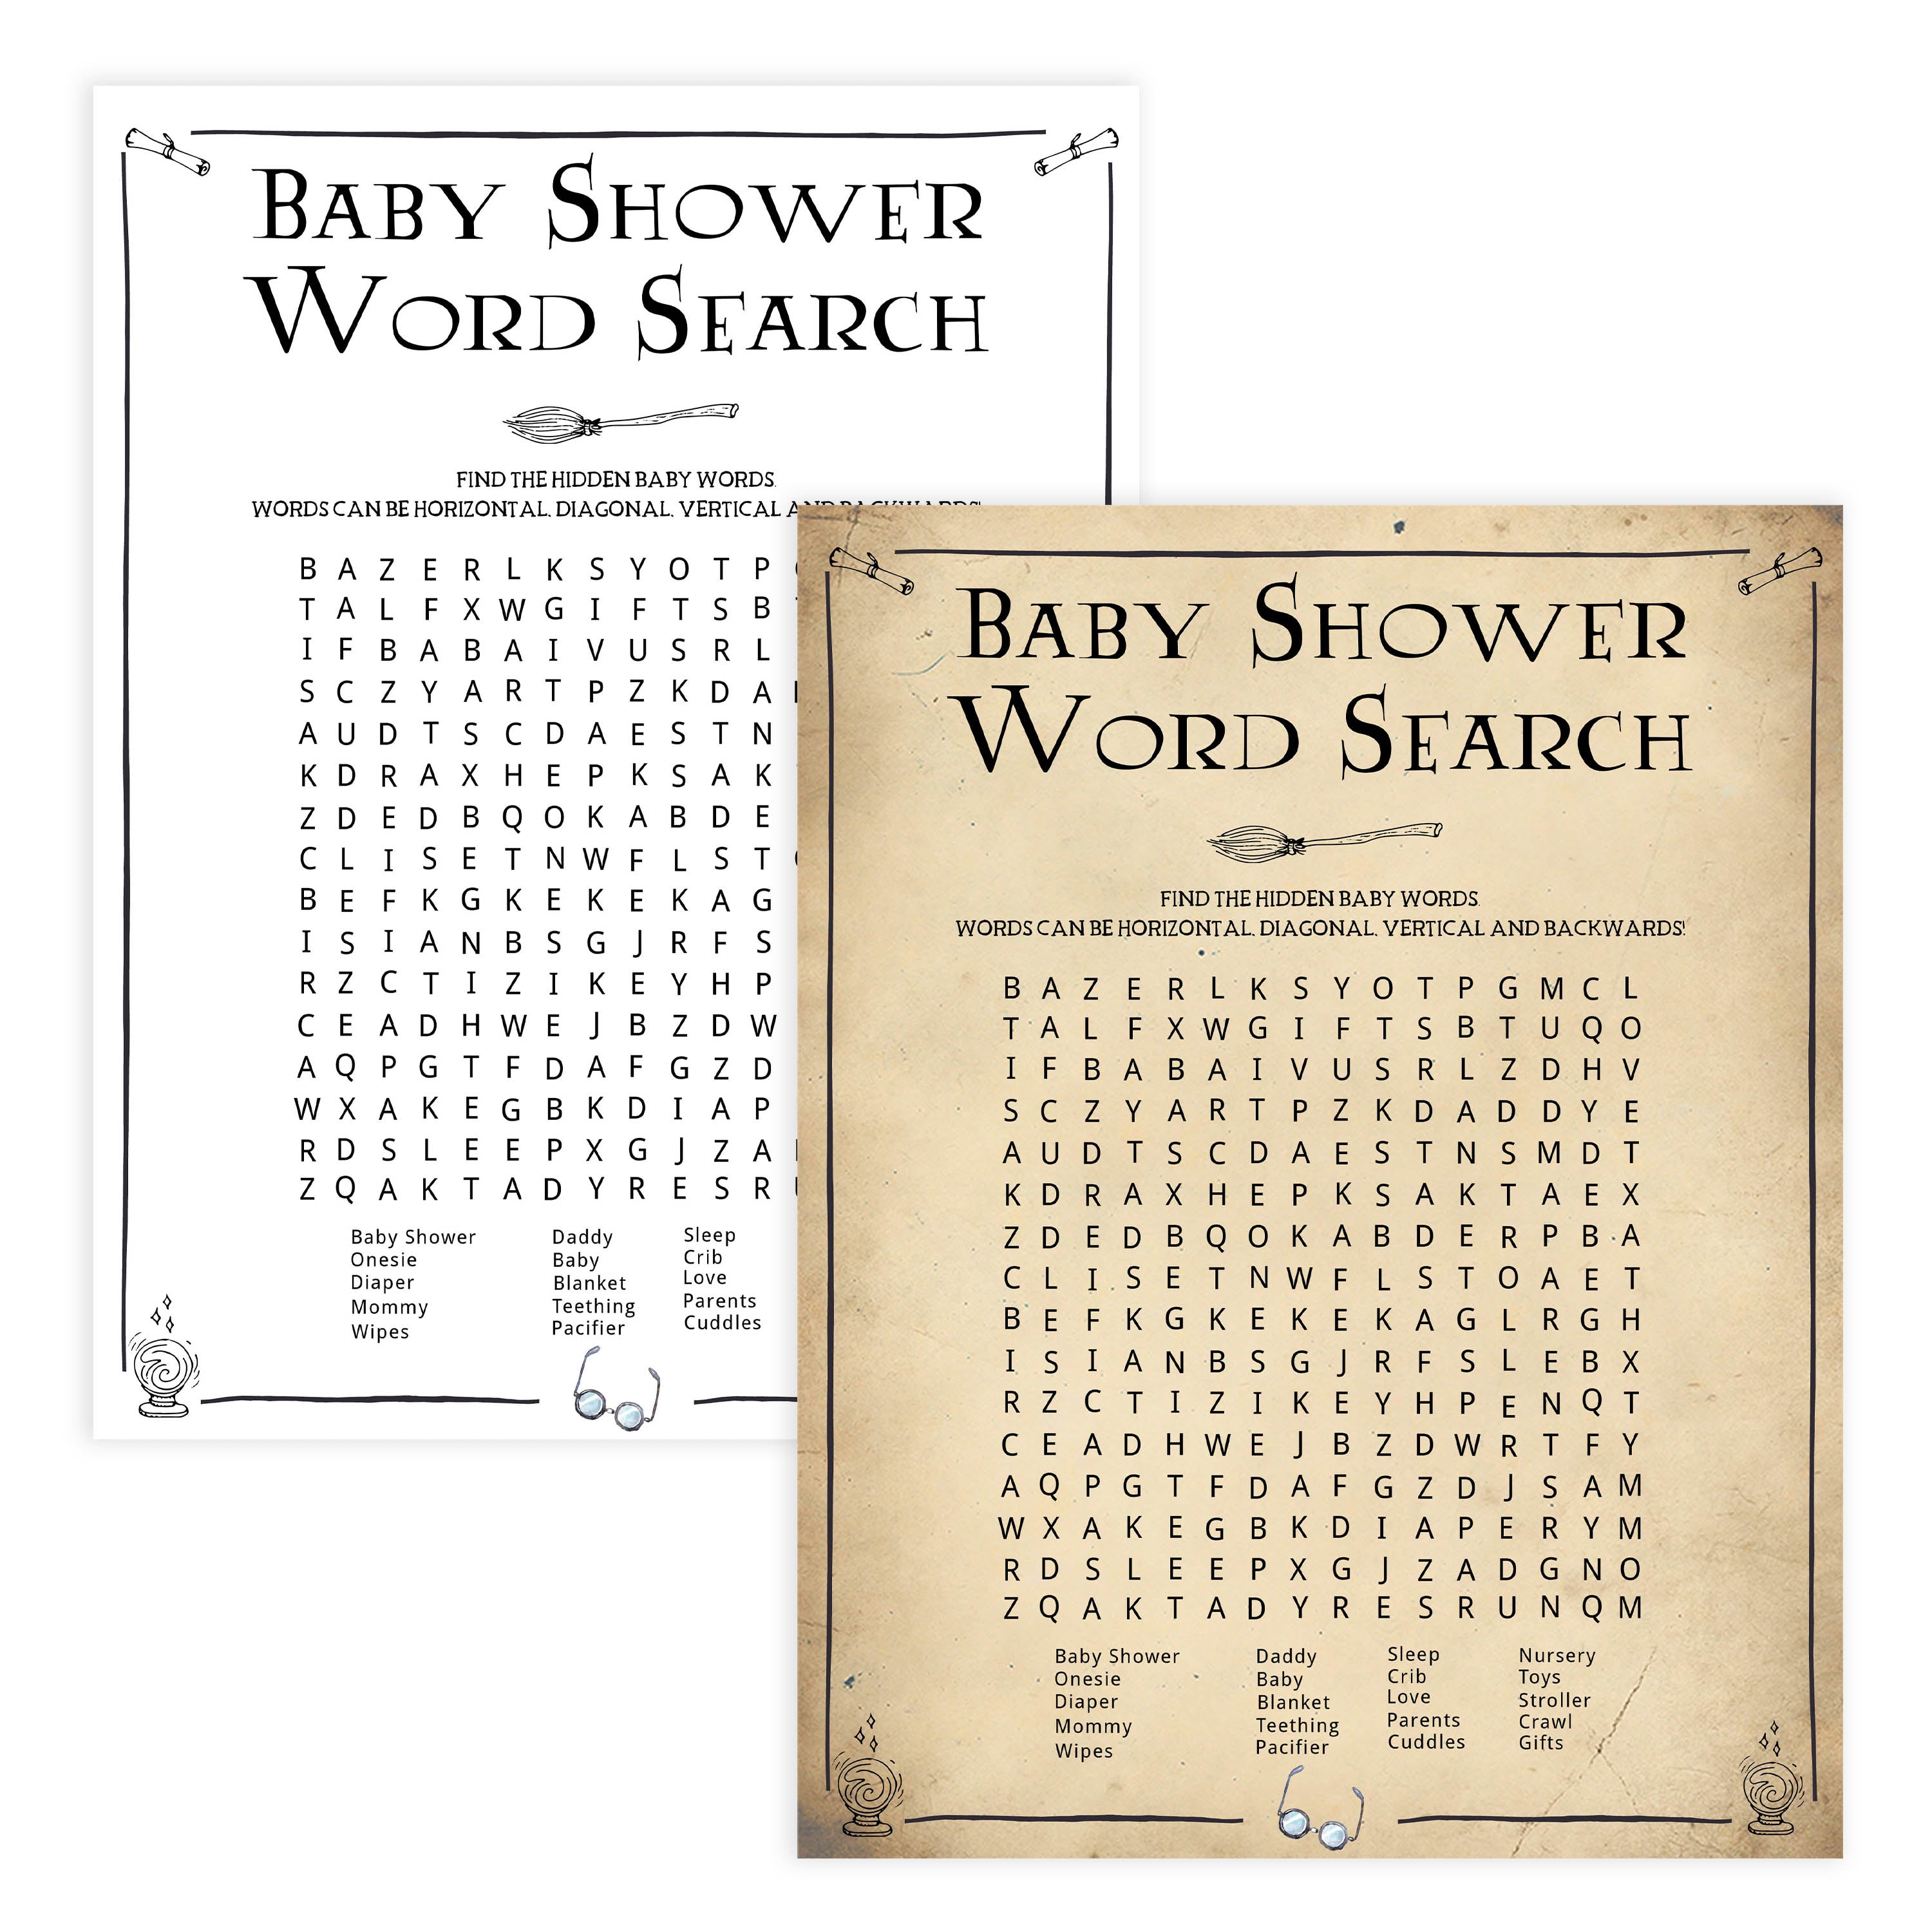 Baby Shower Word Search Game, Wizard baby shower games, printable baby shower games, Harry Potter baby games, Harry Potter baby shower, fun baby shower games,  fun baby ideas